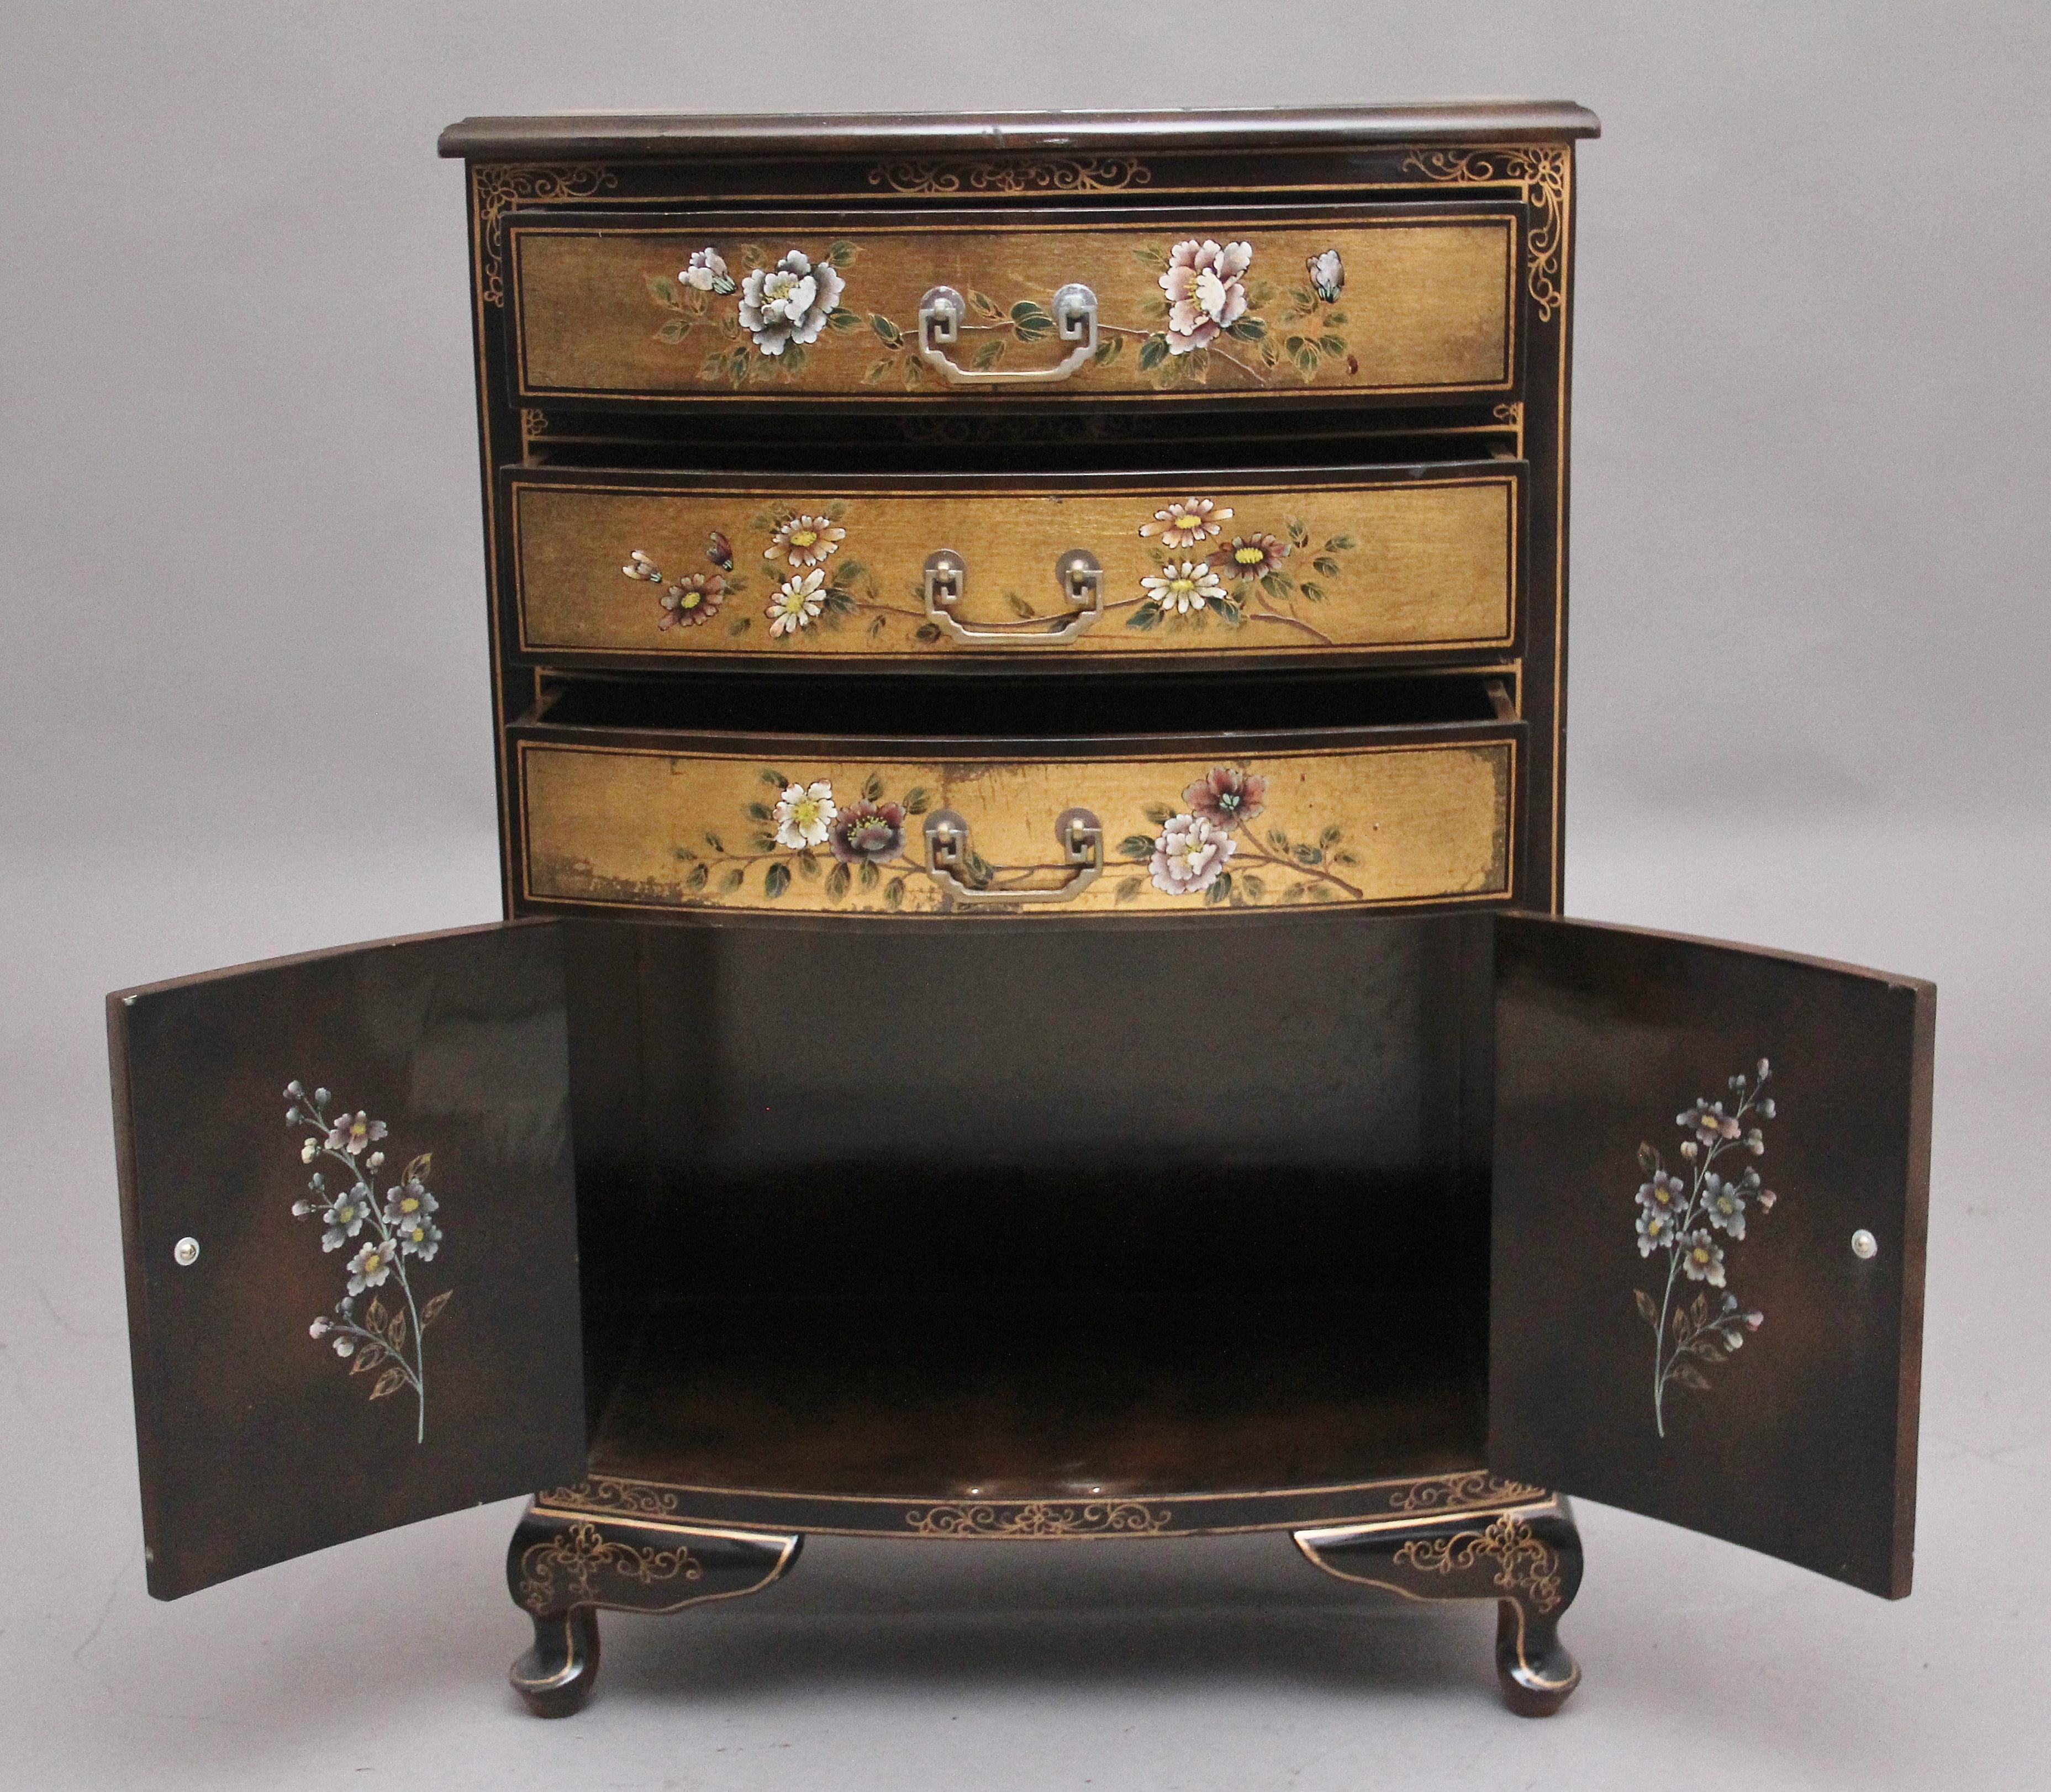 A decorative mid 20th century painted and lacquered cabinet, the shaped moulded edge top having a painted wildlife scene amongst a gold coloured background, the front having of the cabinet consisting of three drawers above a two door cupboard, the